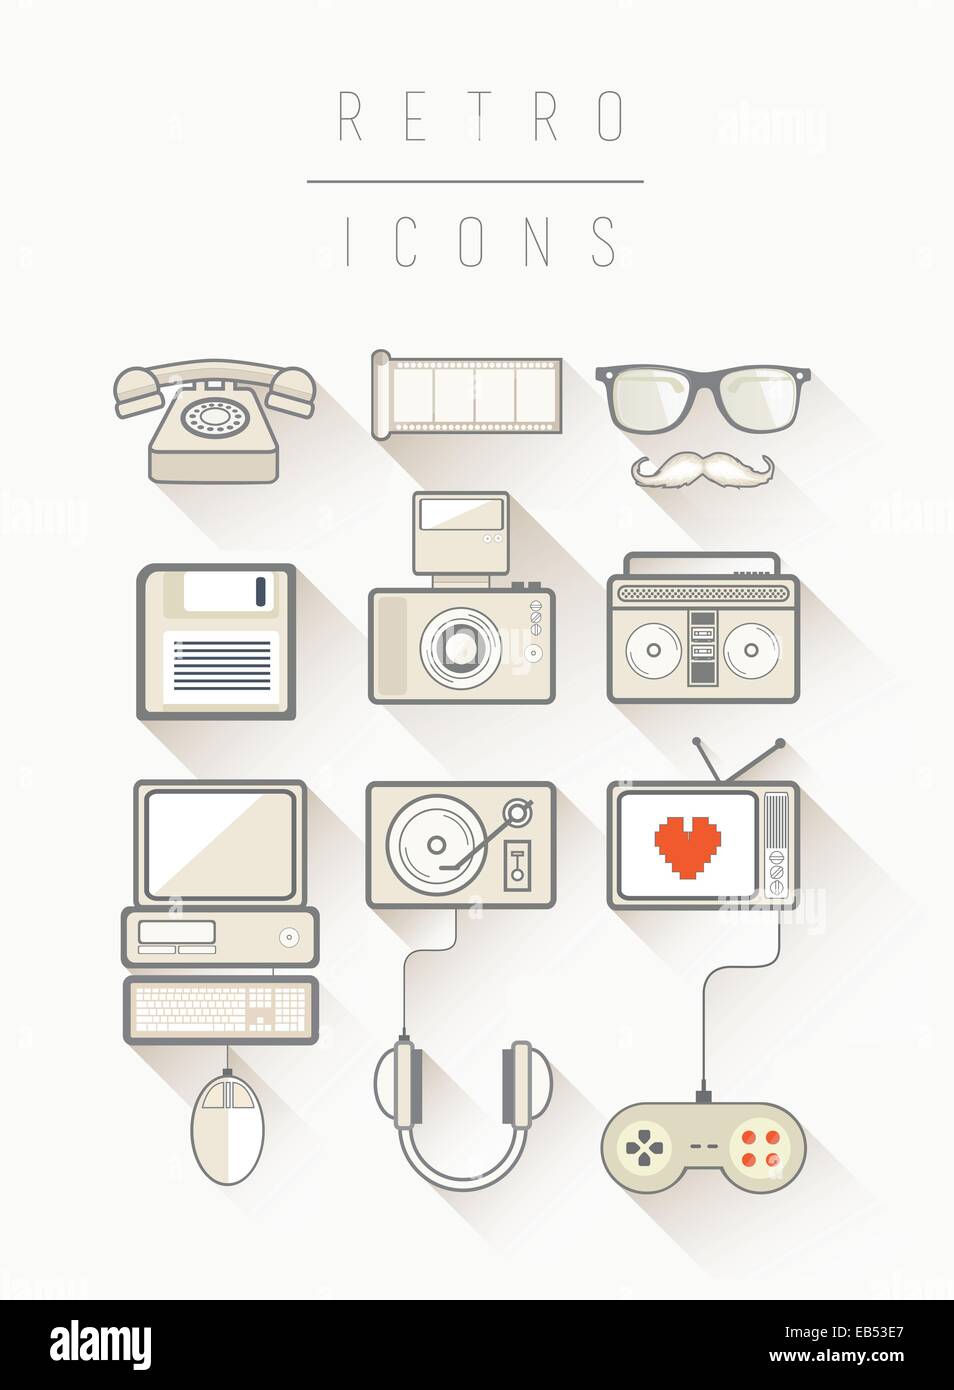 Retro icons vector in simple cool style Stock Vector